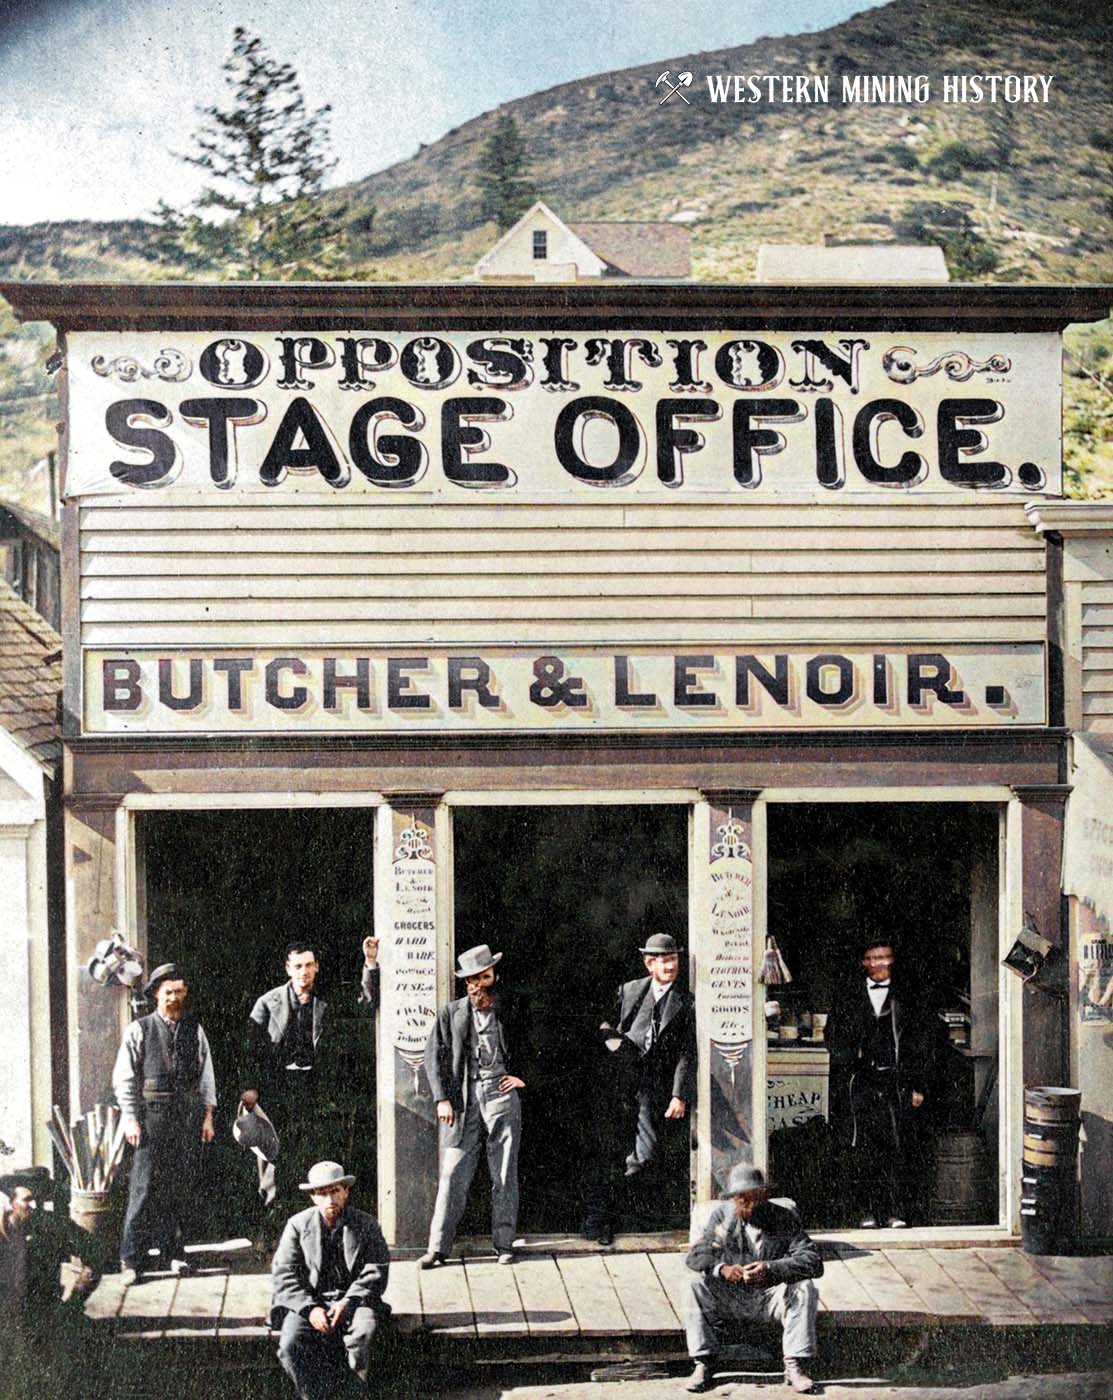  Silver City, Idaho stage office 1868 (colorized)